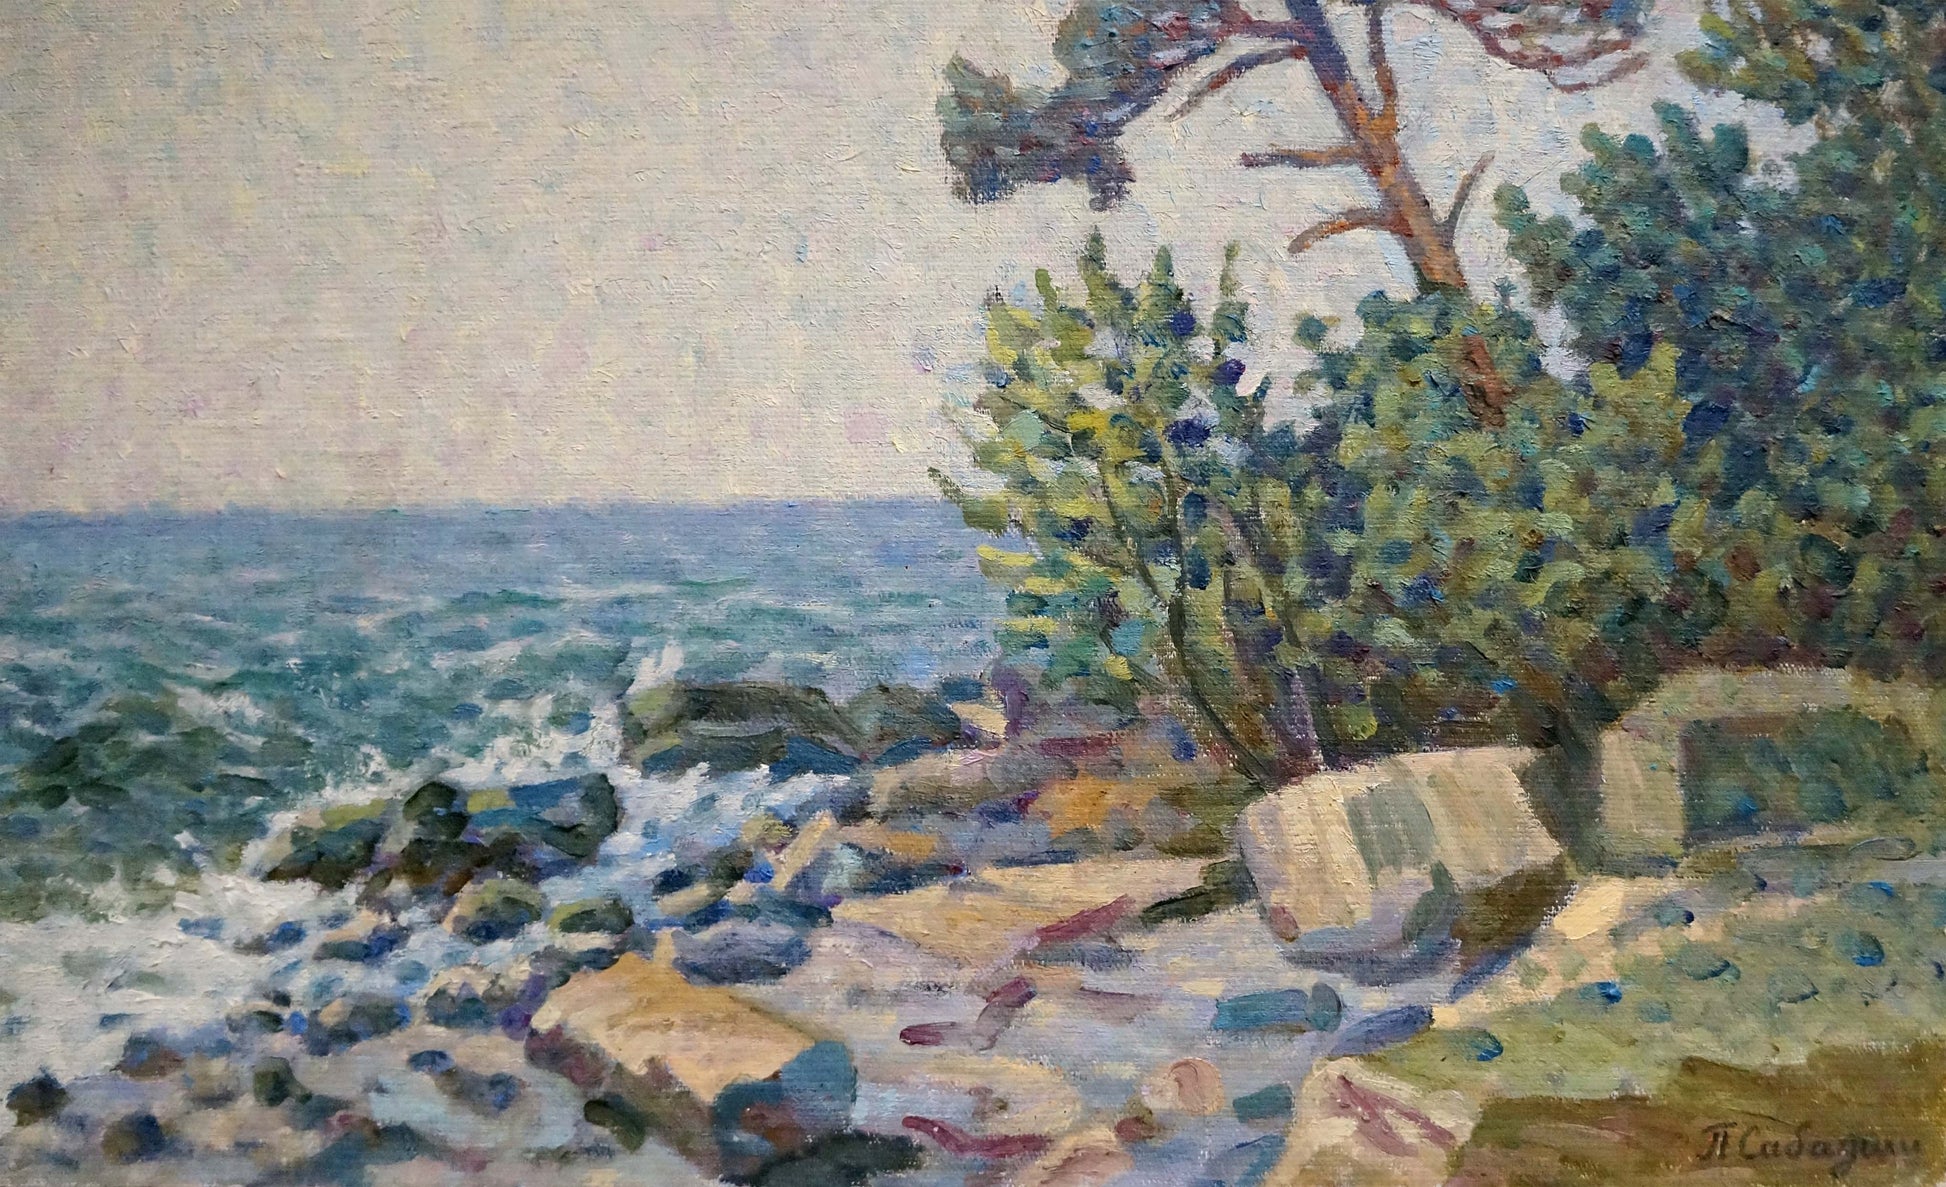 Oil artwork featuring scenes "Off the Coast" by Petro Yevlampiyovych Sabadysh